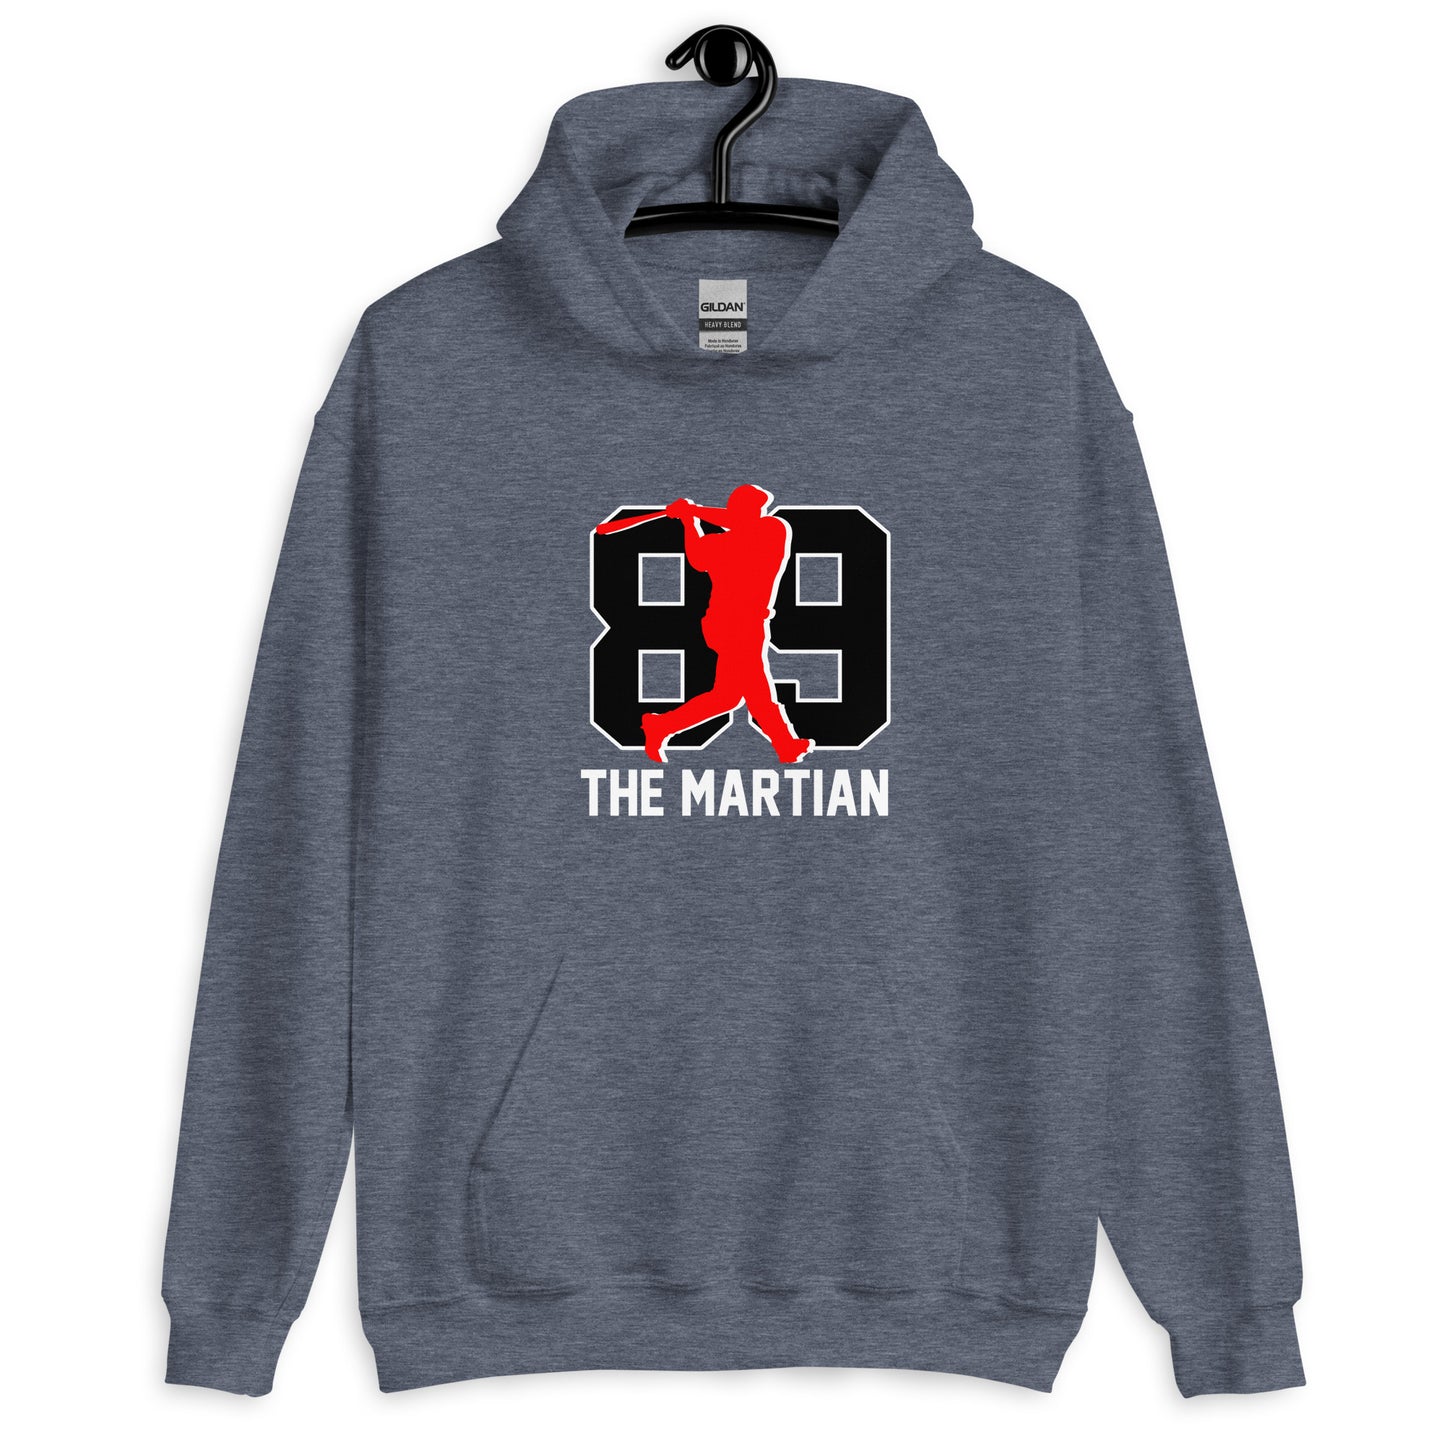 The Martian Silhouette Unisex Hoodie